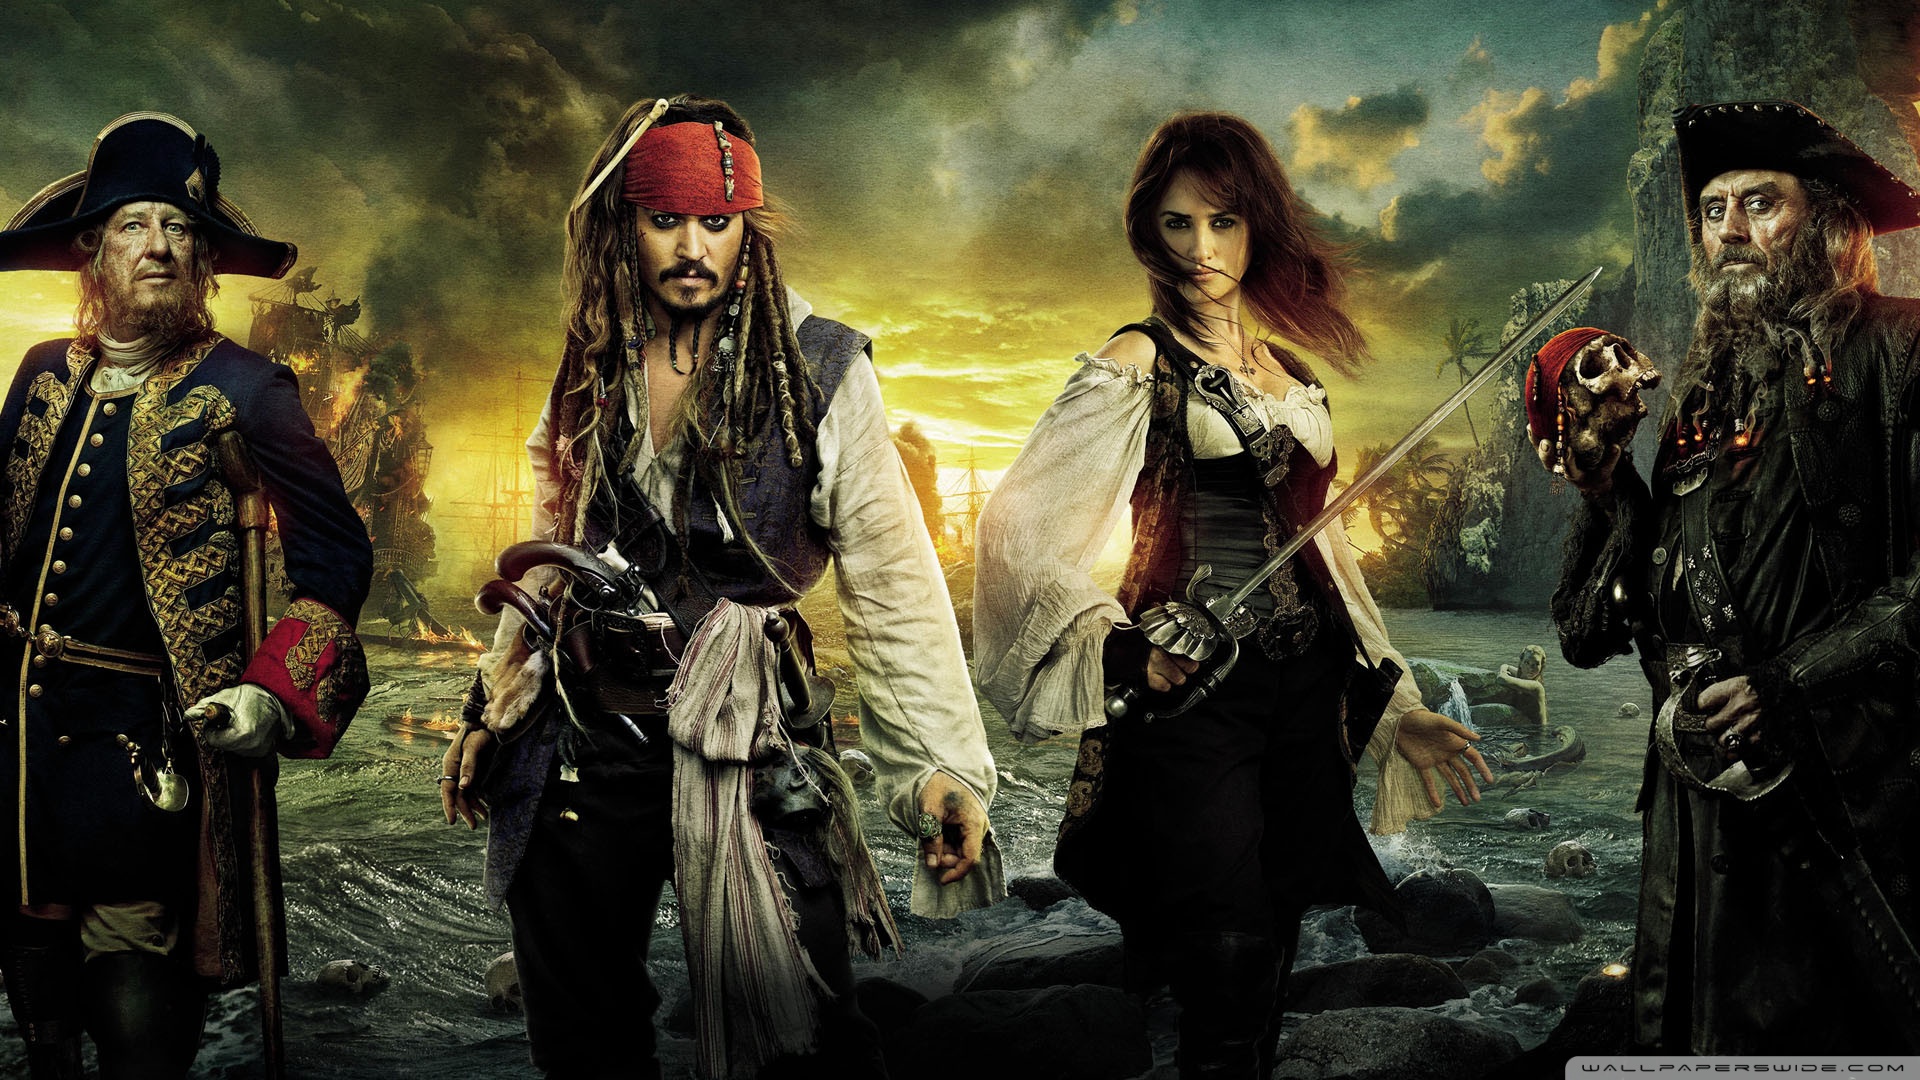 Pirates Of The Caribbean On Stranger Tides 2011 Movie - Pirates Of The Caribbean On Stranger Tides Actors - HD Wallpaper 